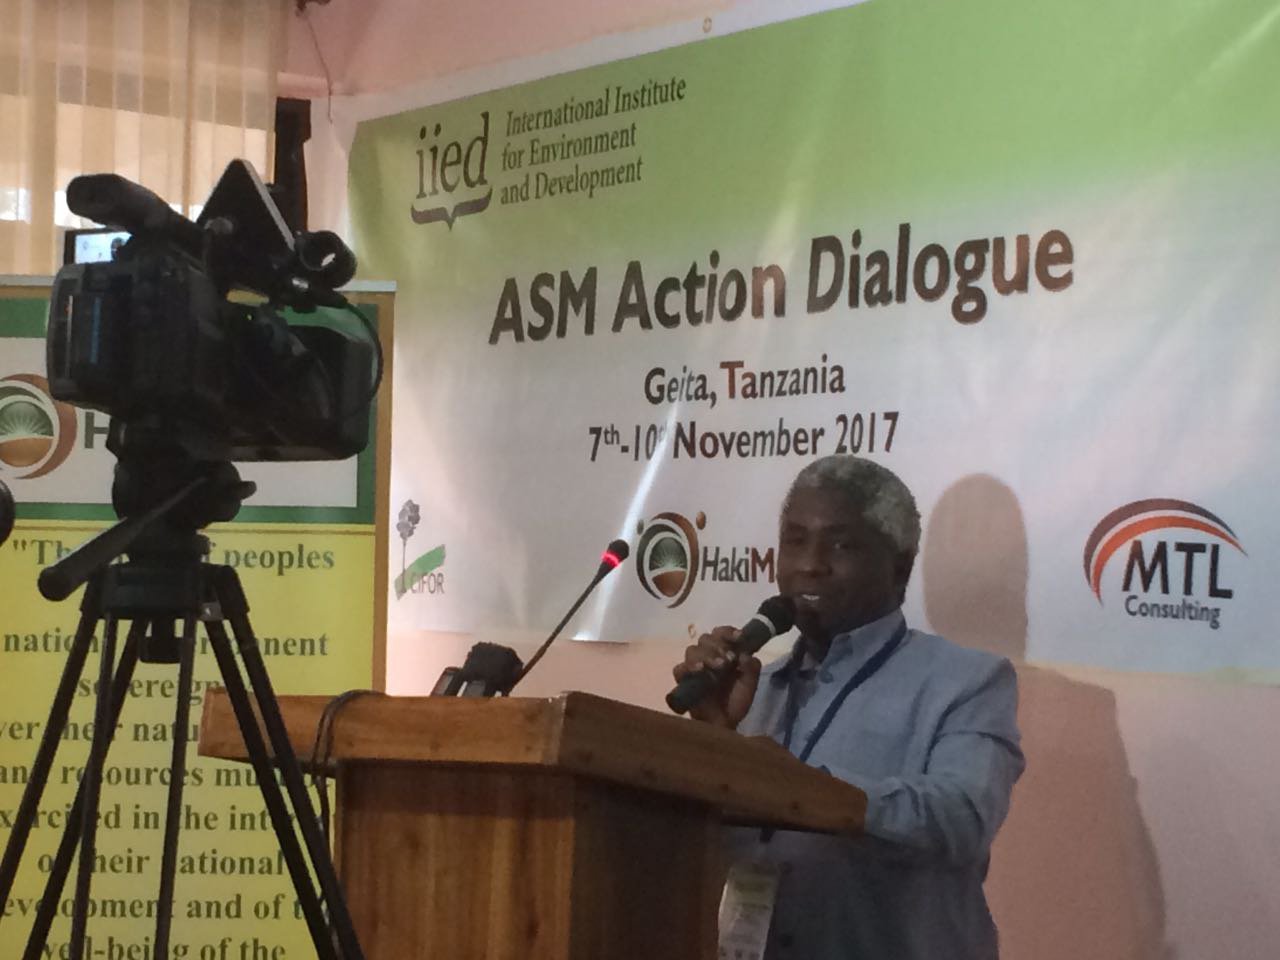 With the field trips completed, the Tanzanian dialogue on artisanal & small-scale #mining has entered the workshop stage. David Mulabwa, assistant commissioner for #ASM, welcomes participants https://t.co/vgQkQoS3xG